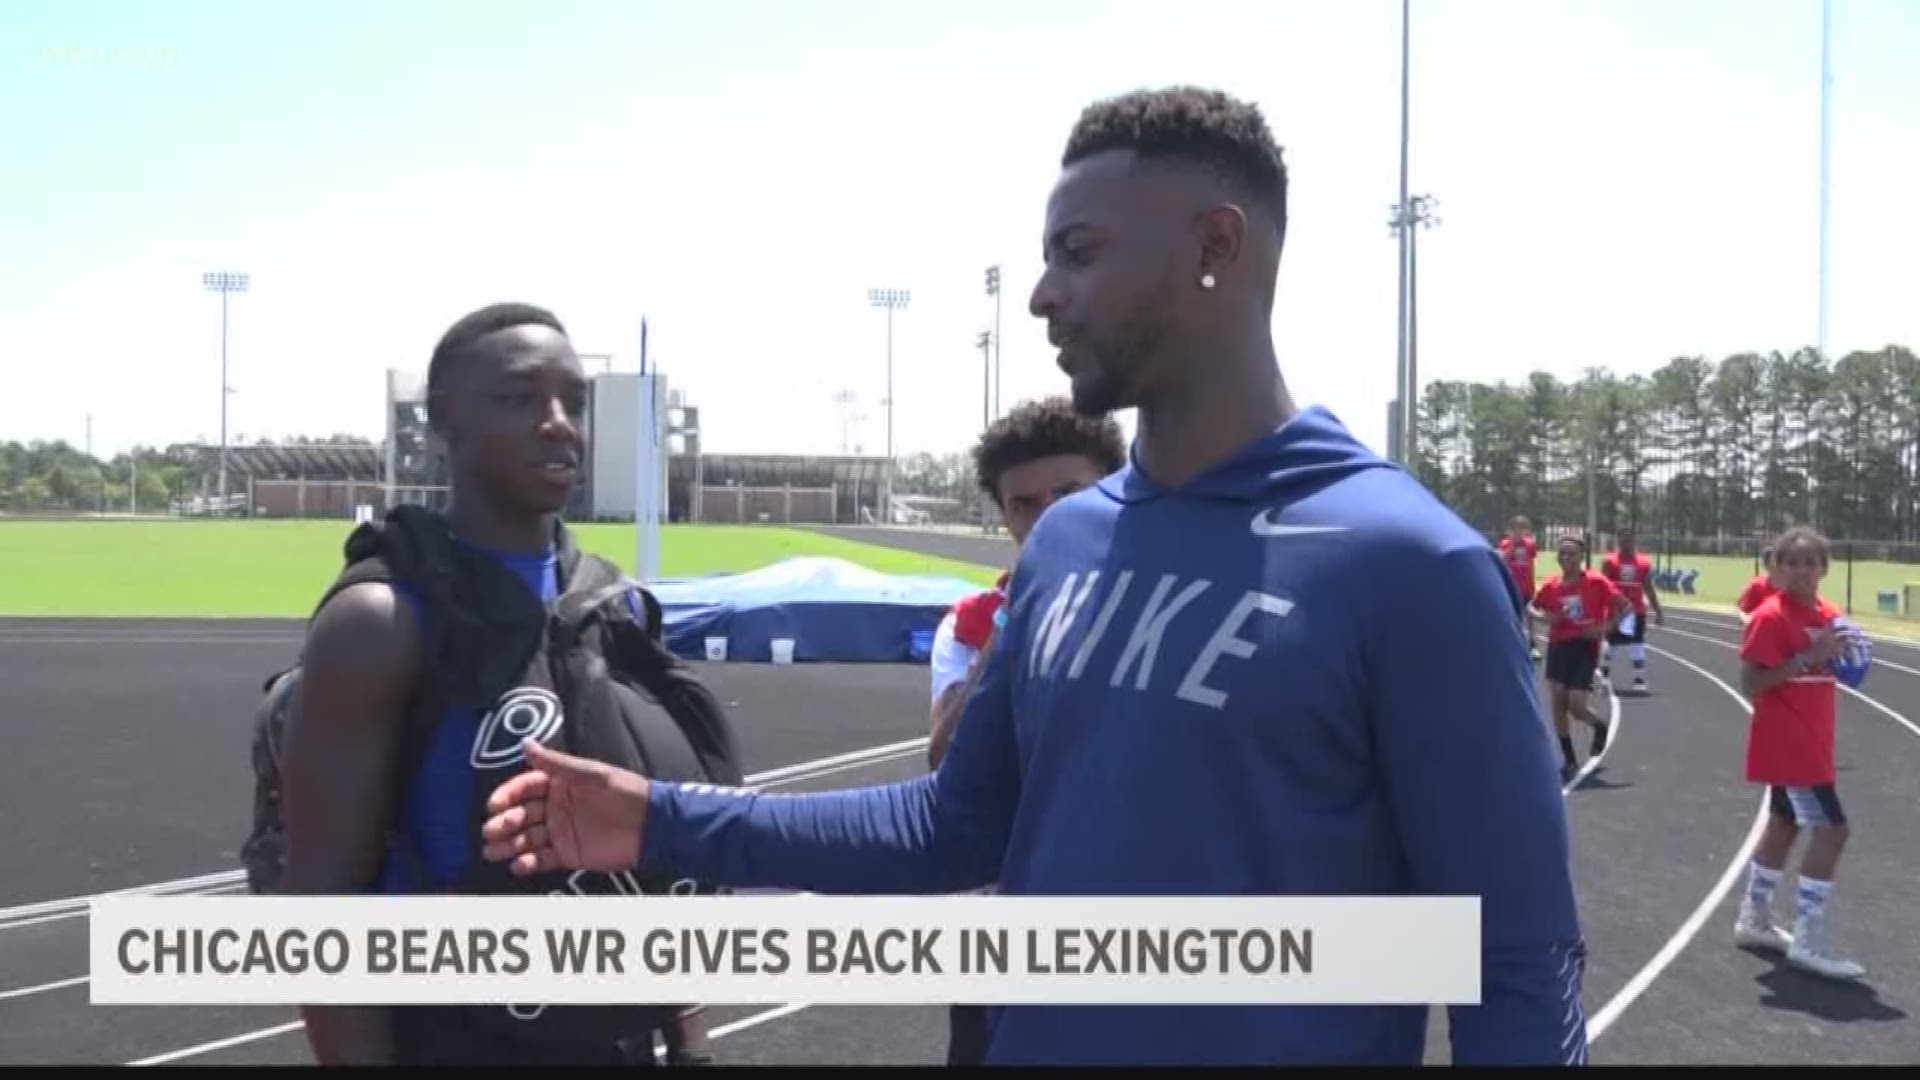 Former Batesburg-Leesville standout and Chicago Bears wide out Dontrelle Inman was back in the Midlands for his annual football camp. Being able to interact with the kids a deliver a positive message was and is always the goal for him.